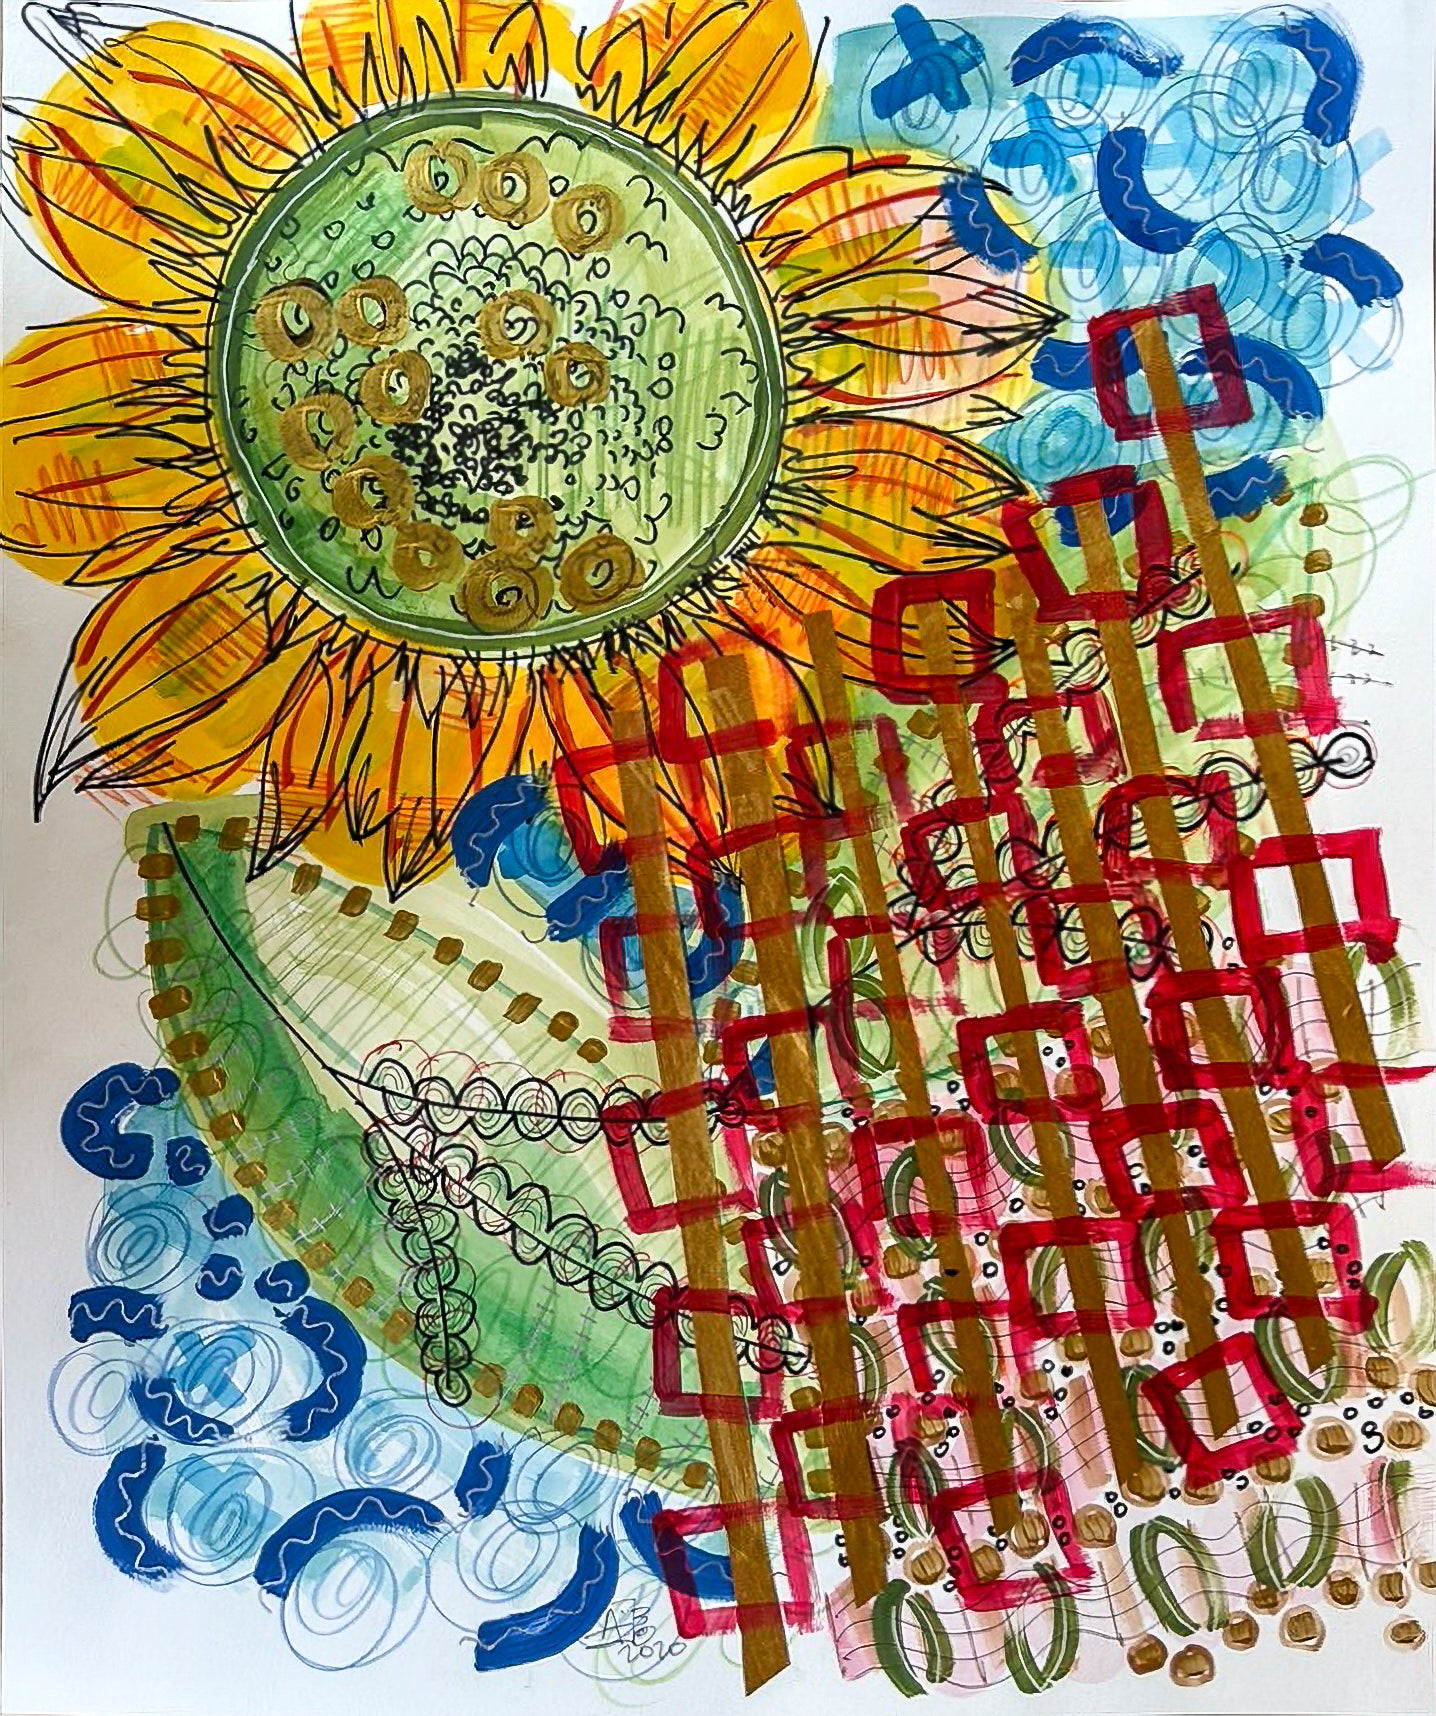 Colorful mixed media abstract and graphic design titled Sunflower at Sea by artist Jenifer Hernandez.